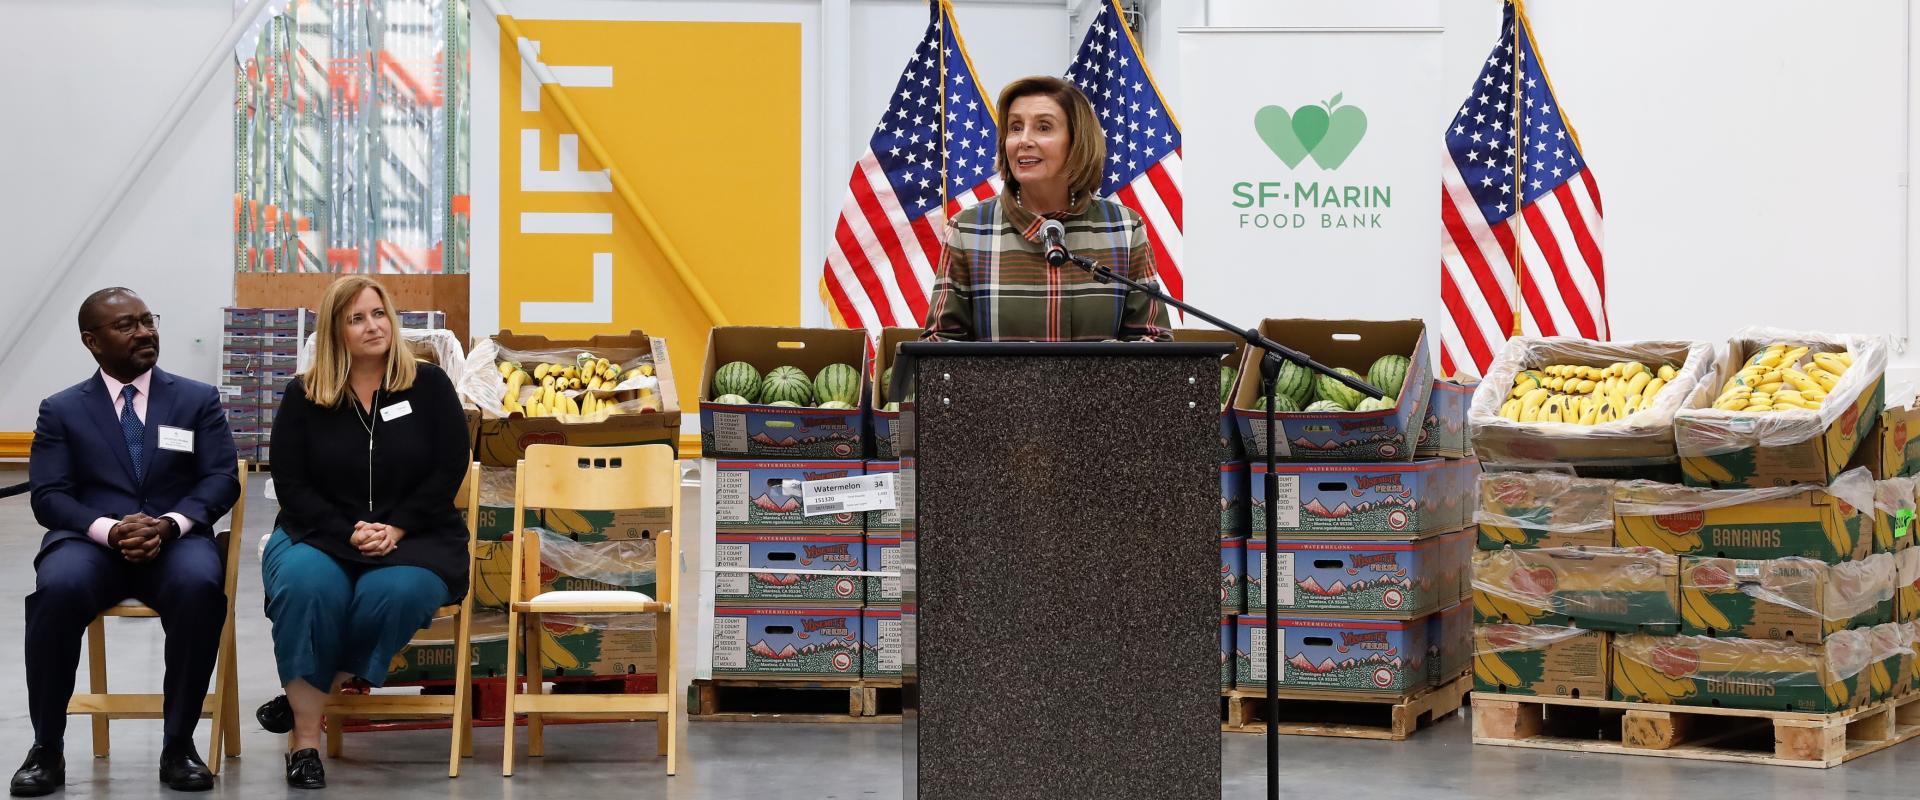 Congresswoman Nancy Pelosi joined San Francisco-Marin Food Bank Vice Chair Johnathan Walker, Executive Director Tanis Crosby and the rest of the Staff and Board at the ribbon cutting of their  new warehouse expansion, which will allow the Food Bank to dis